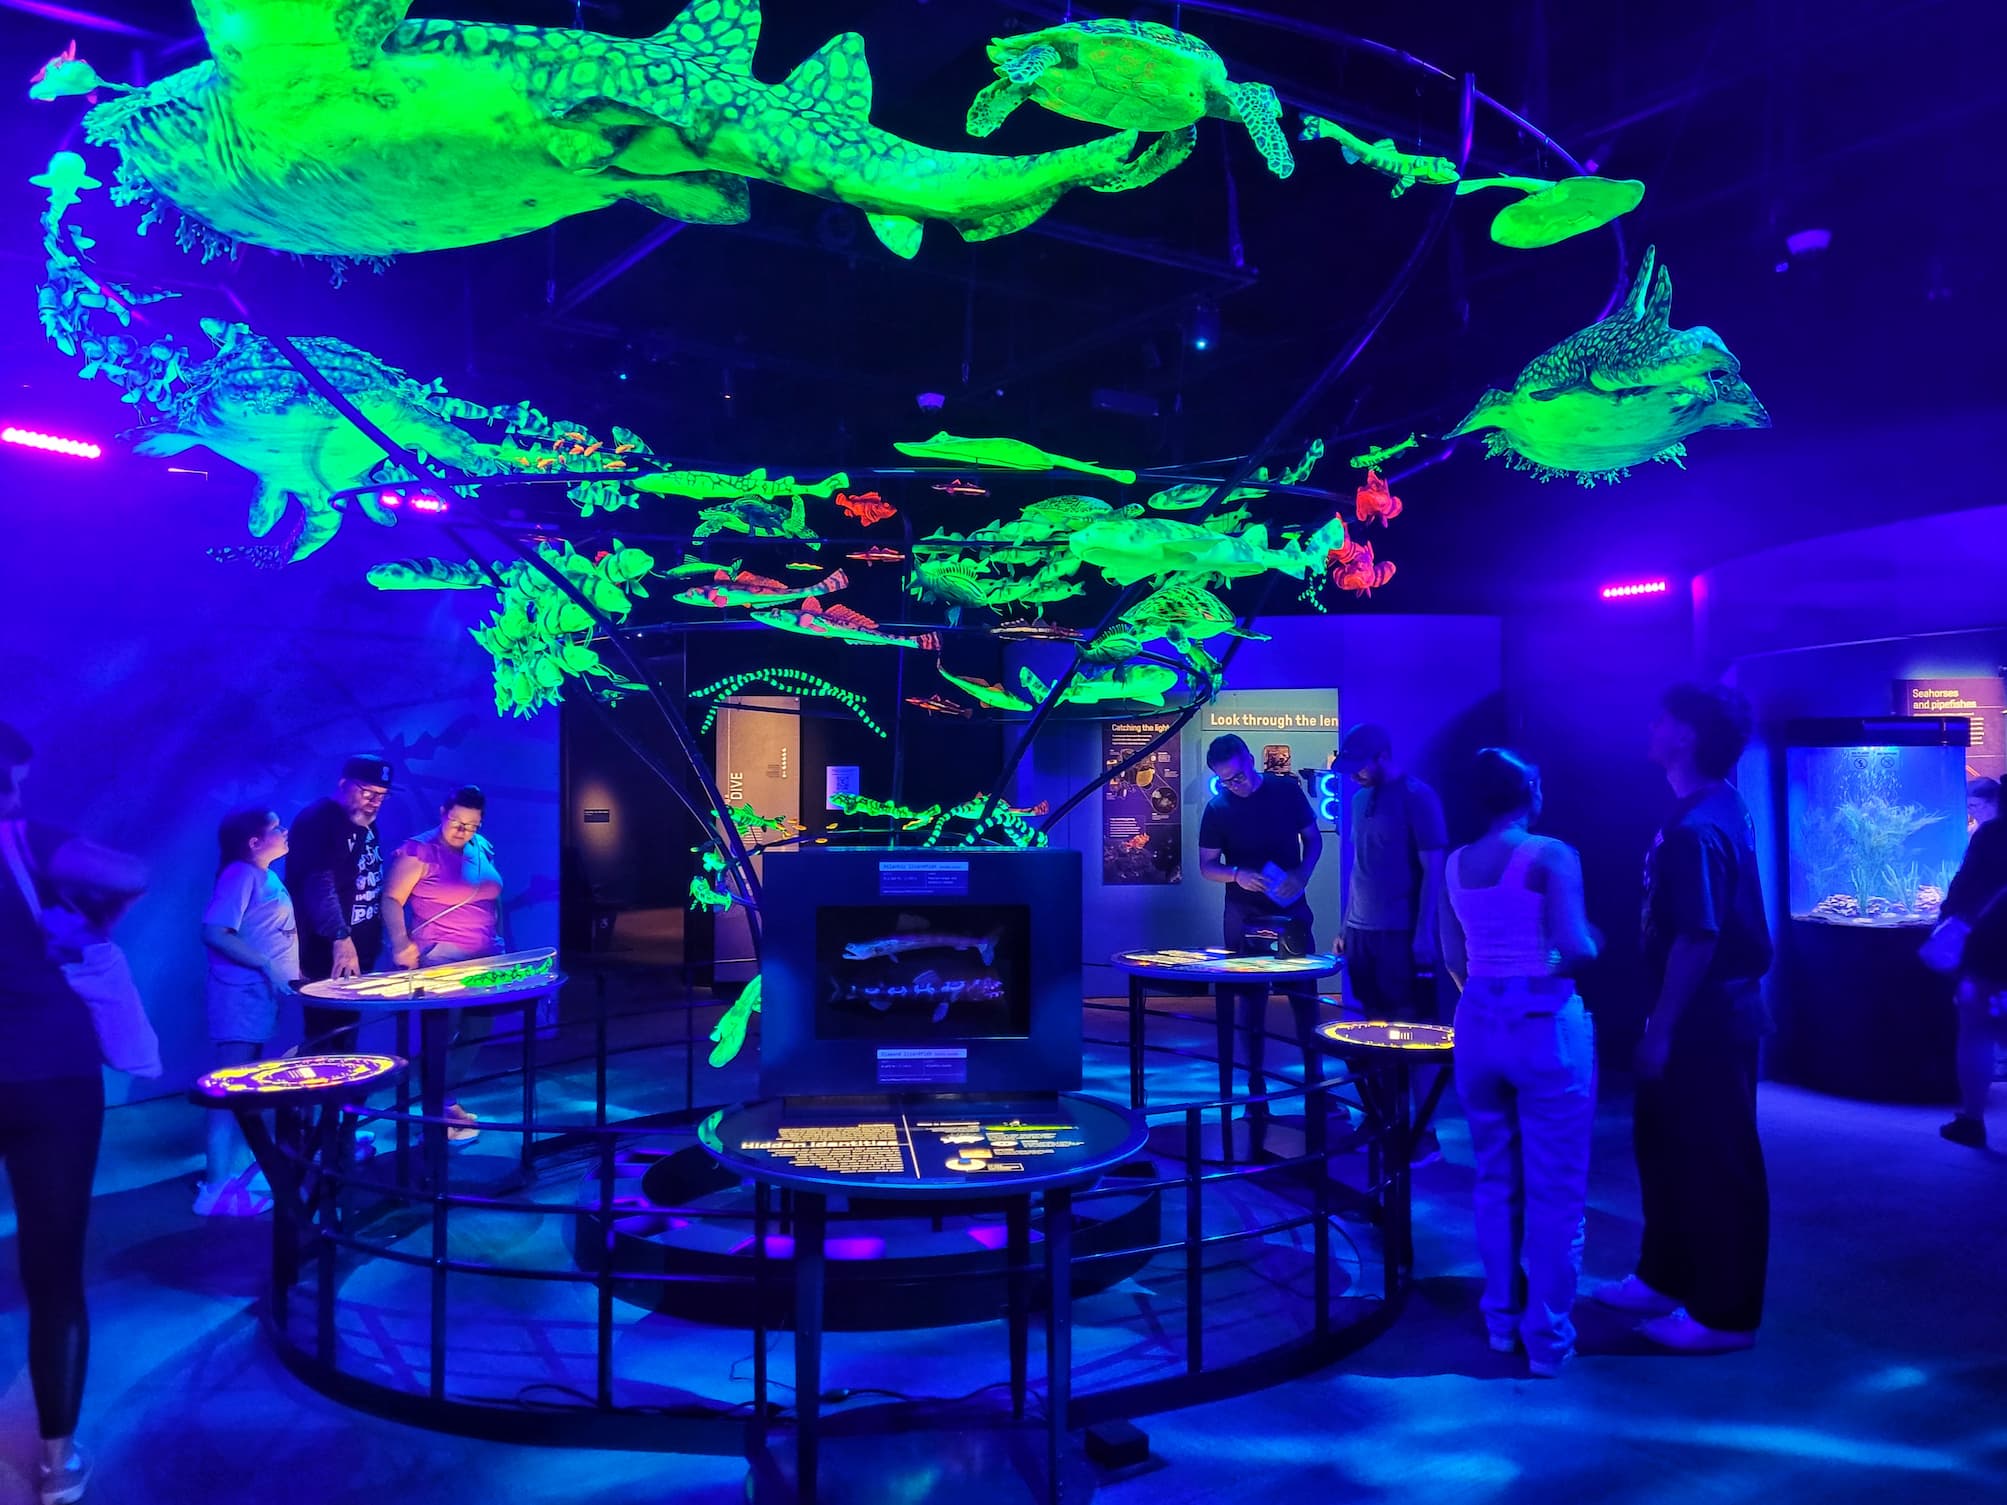 Oceans Unseen: Exploring the Field Museum’s New Temporary Exhibit